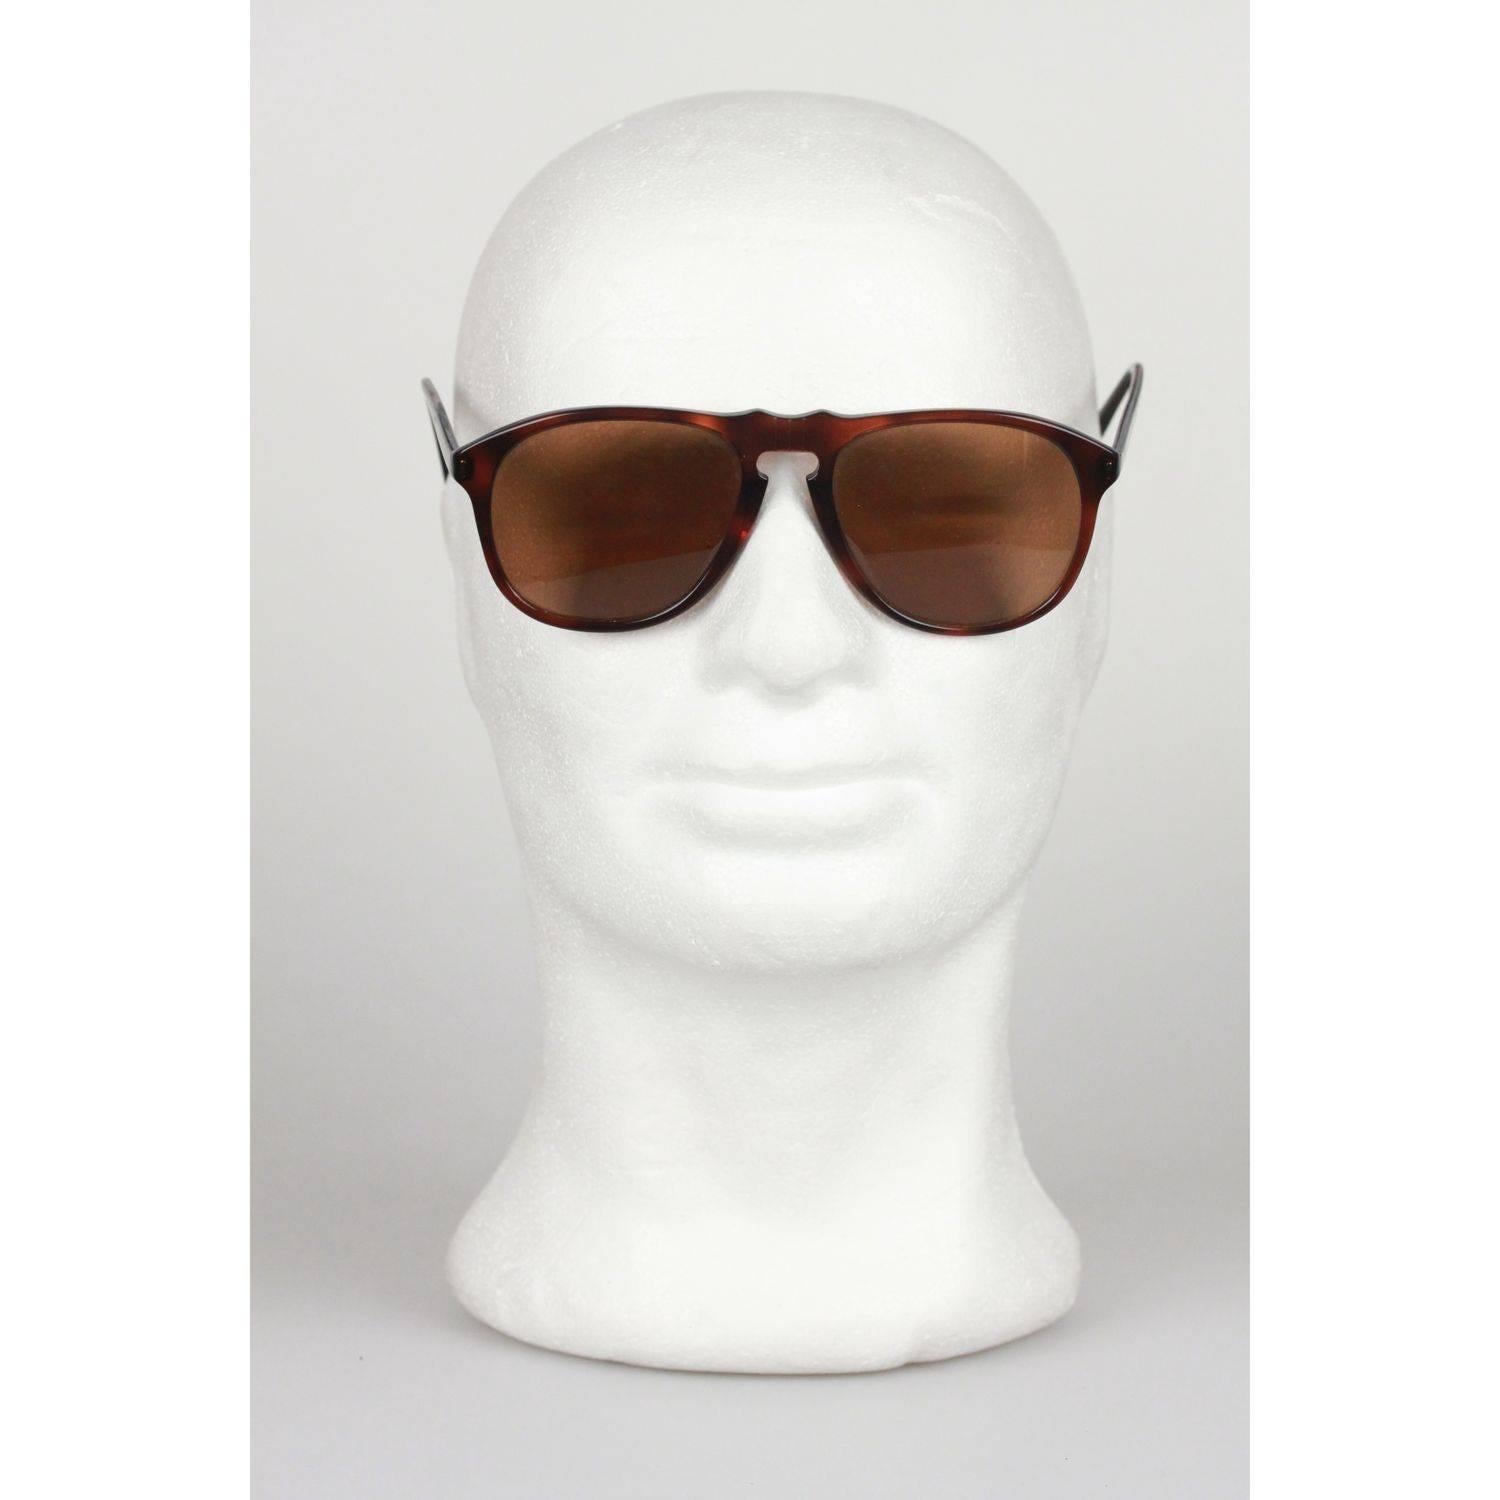 
- PERSOL RATTI sunglasses mod.049/4 from the 80s
- brown plastic frame
- similar to the movie sunglasses by Persol Ratti
- just like the 649, just without the Meflecto-system
- impact resistant quality-lenses (mineral lenses)
- PERSOL logo on both